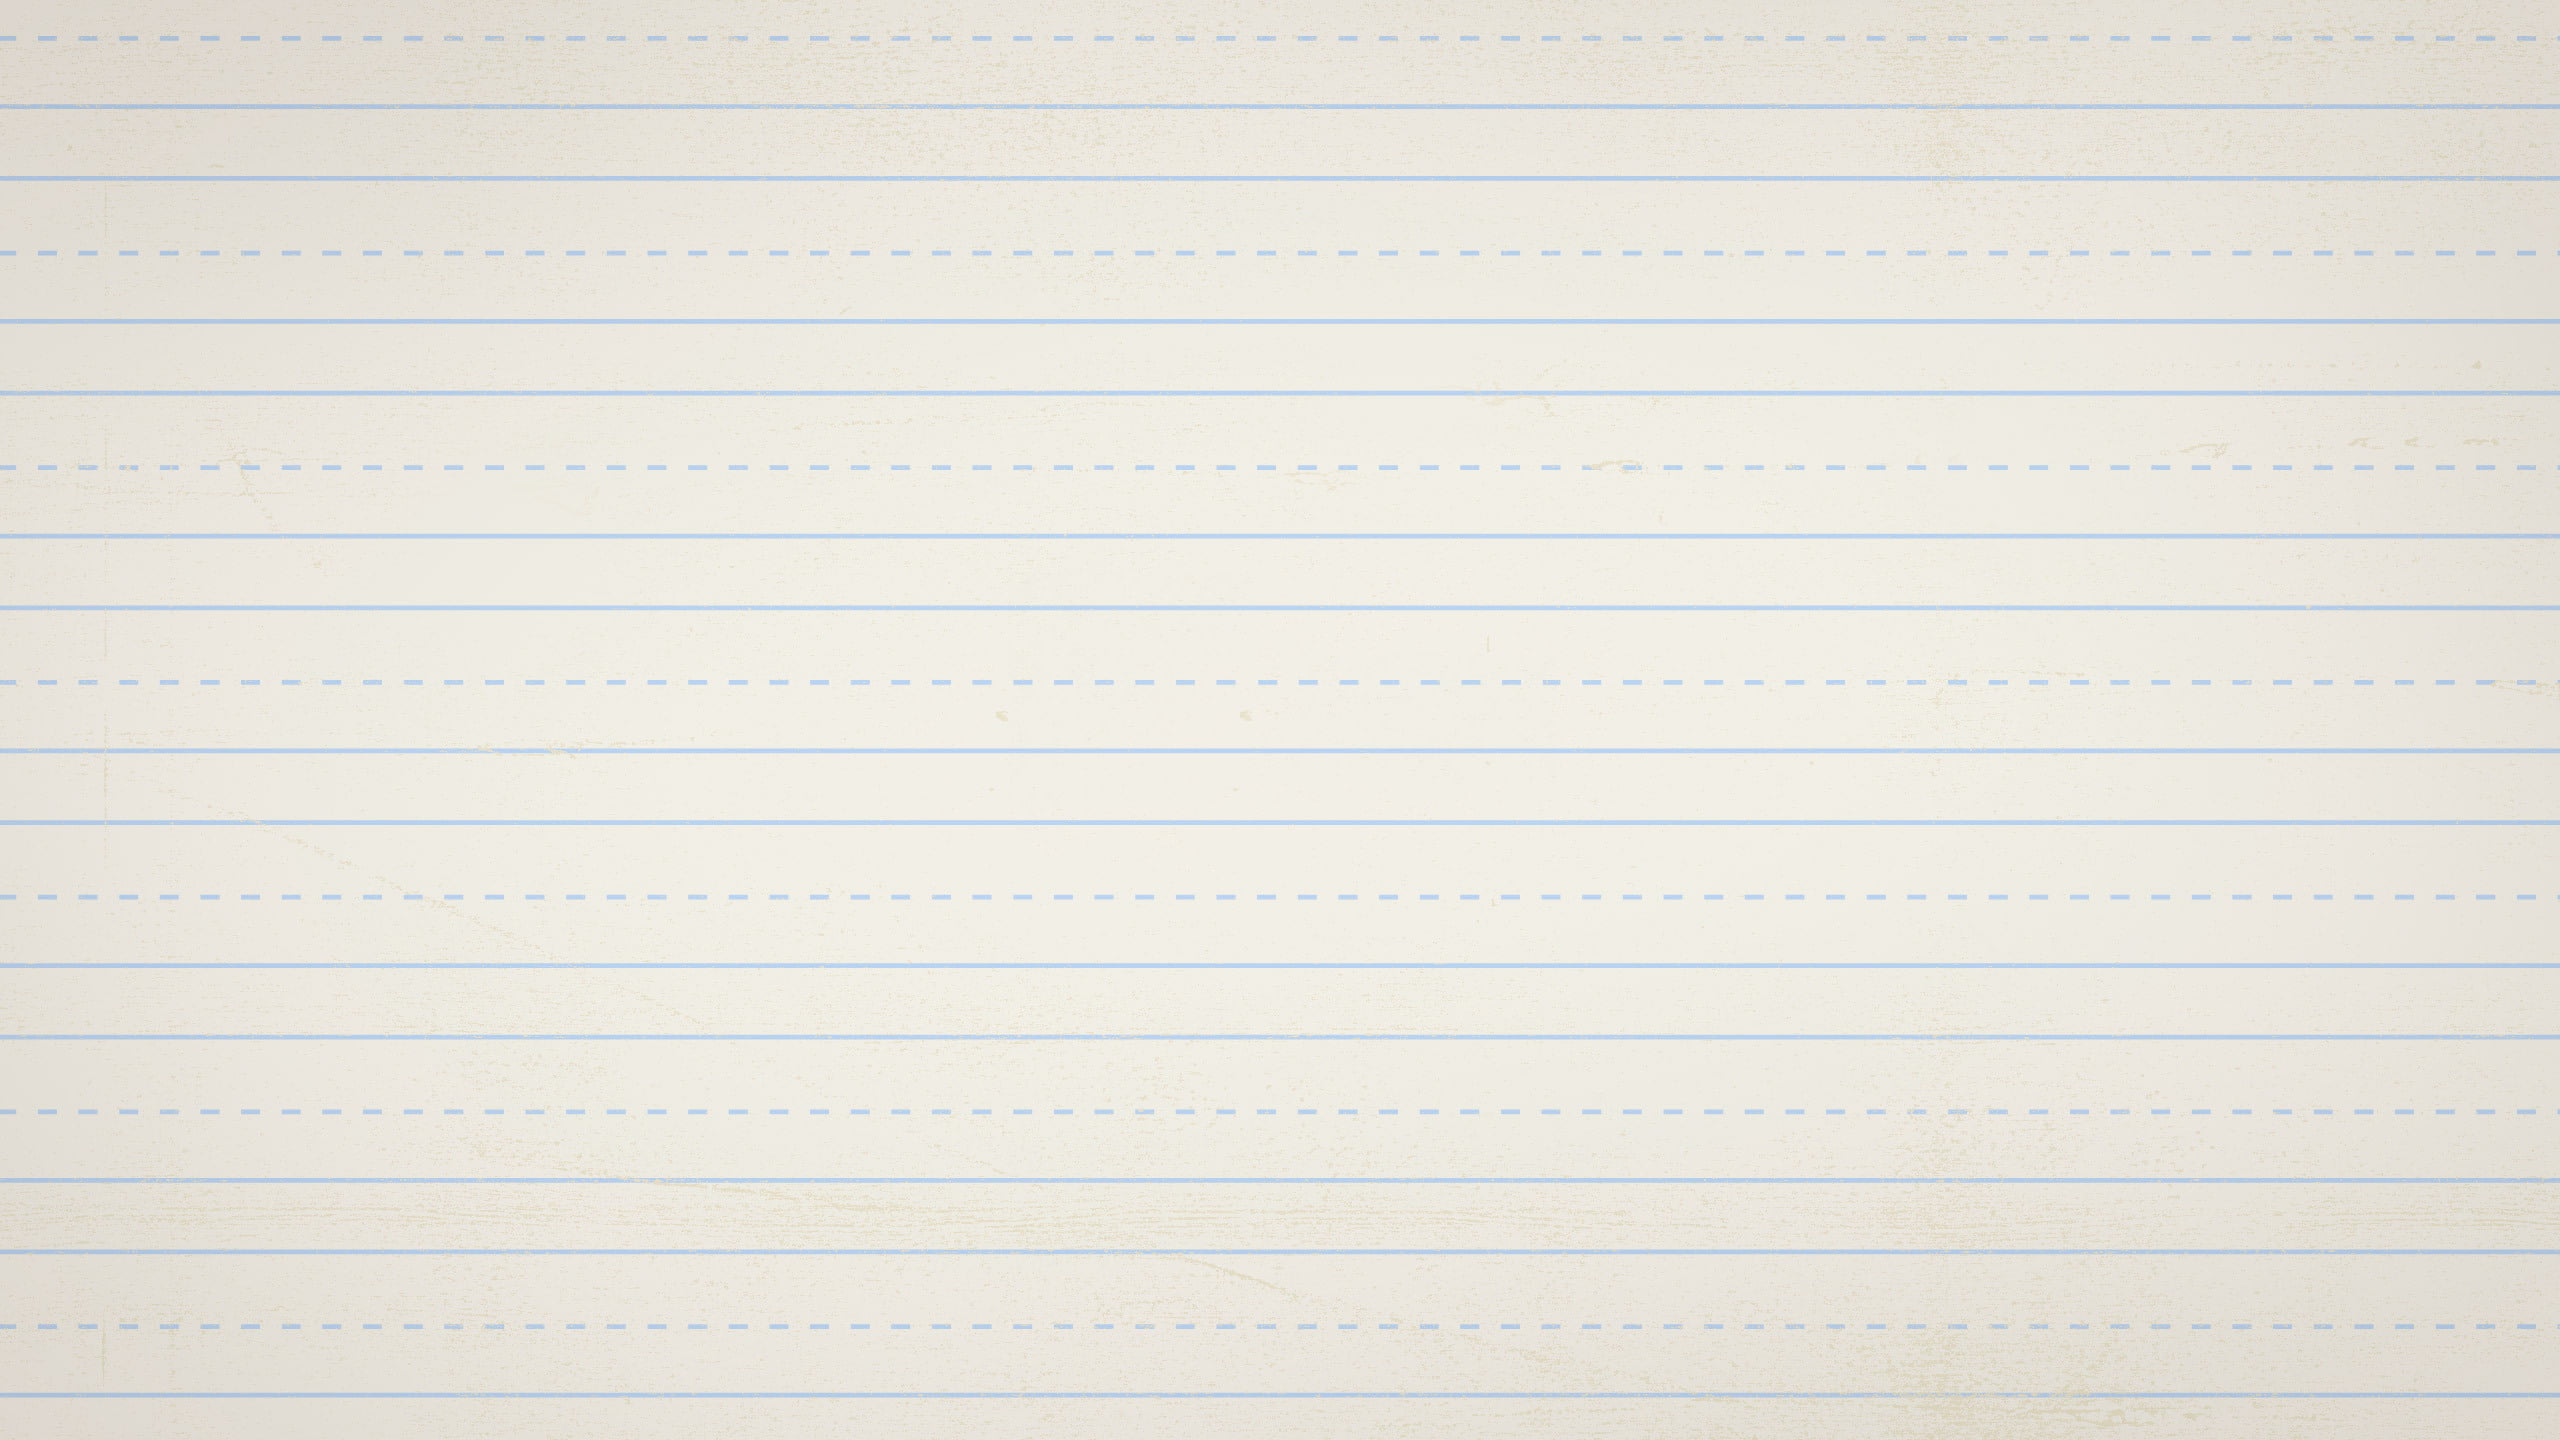 white lined paper, sheet, minimalism, texture, backgrounds, pattern